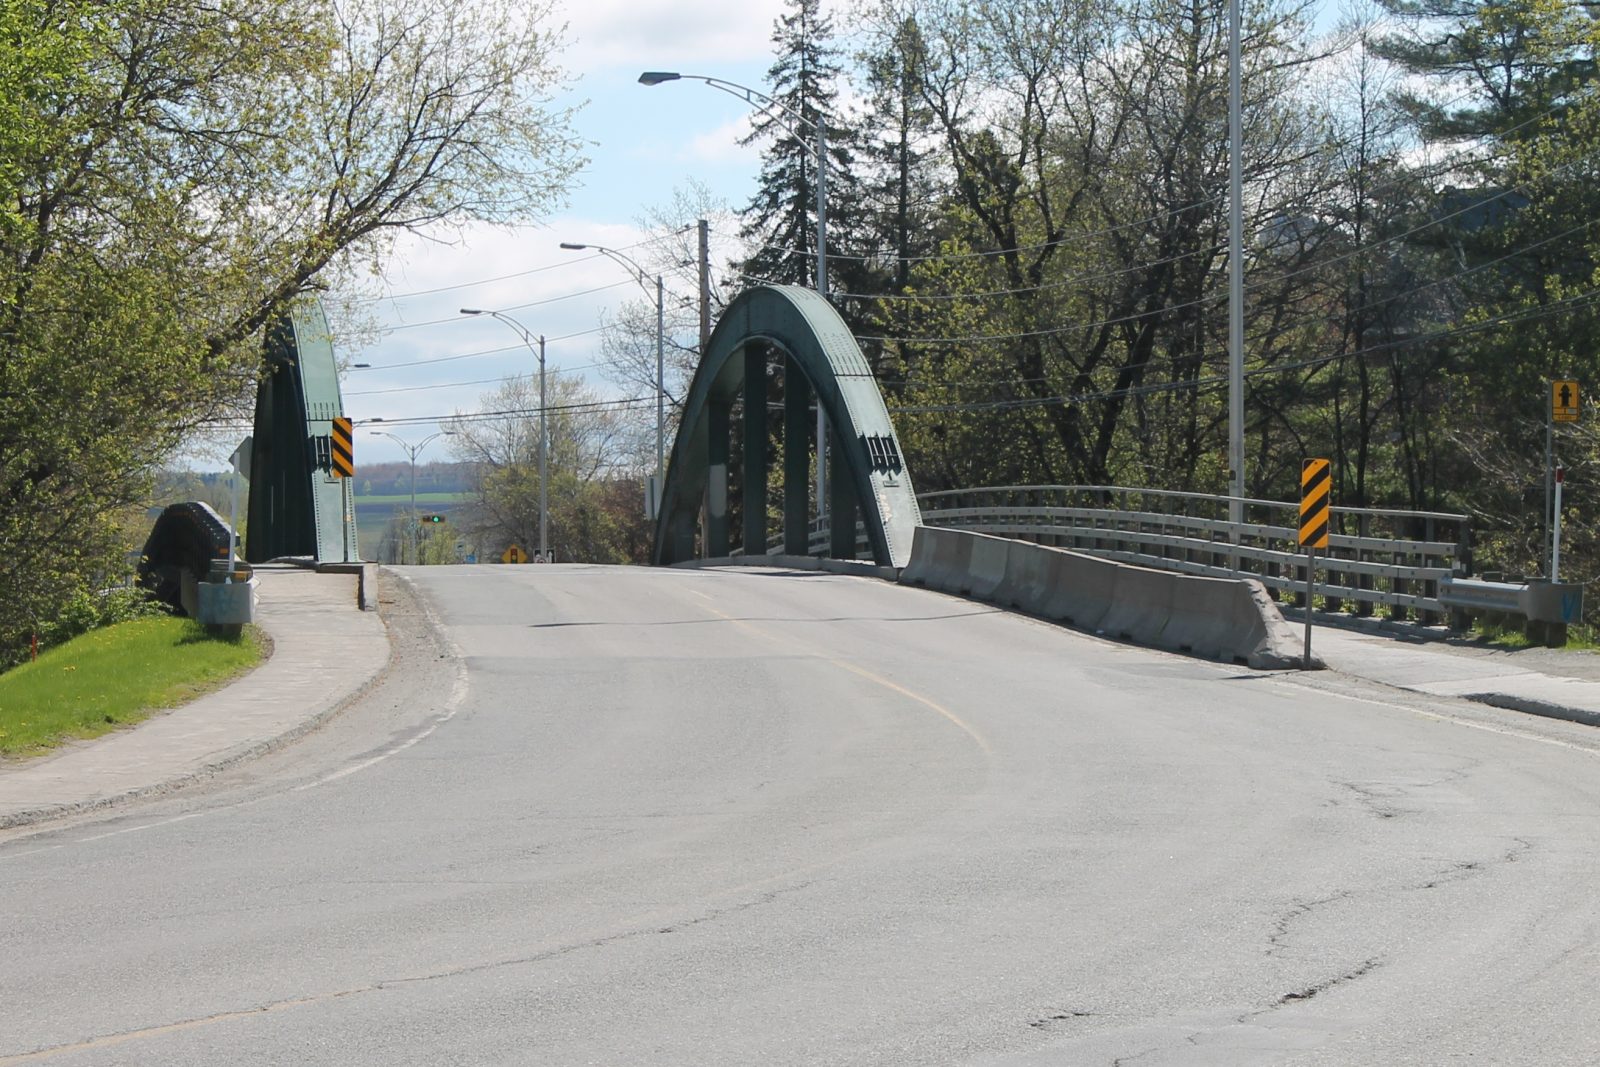 Bridge tensions ease with new detour information and pedestrian access